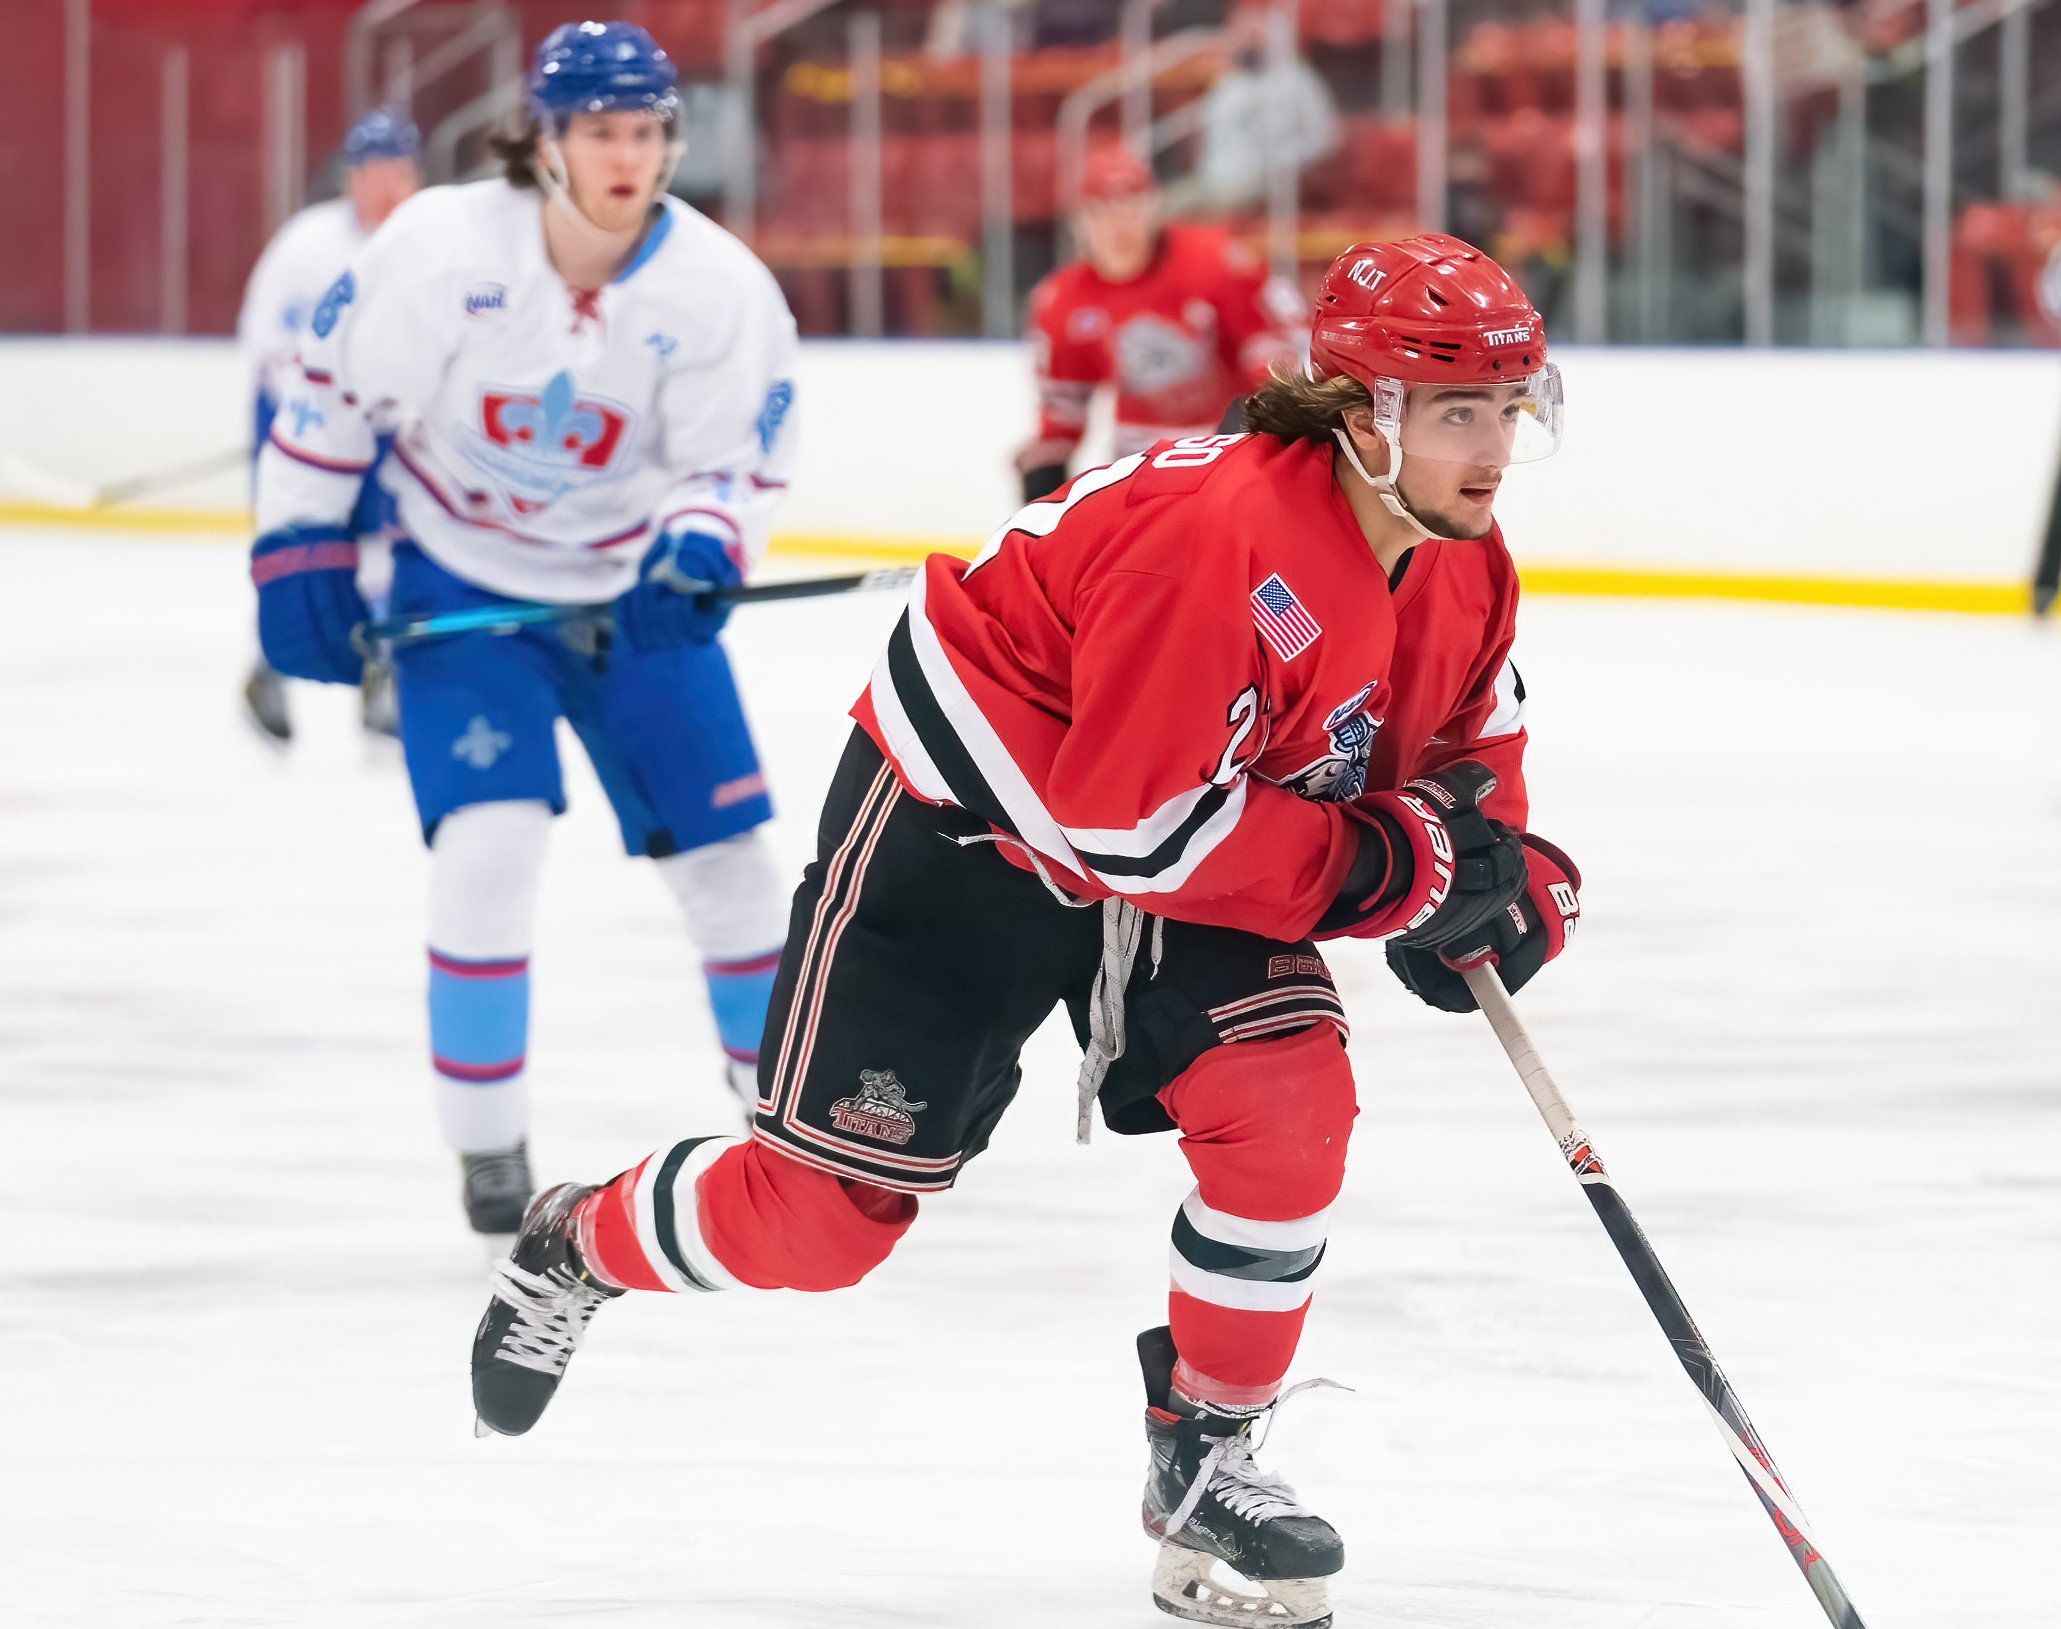 Game recap: Doyle and LaRusso help Titans to 7 – 3 win over Nordiques